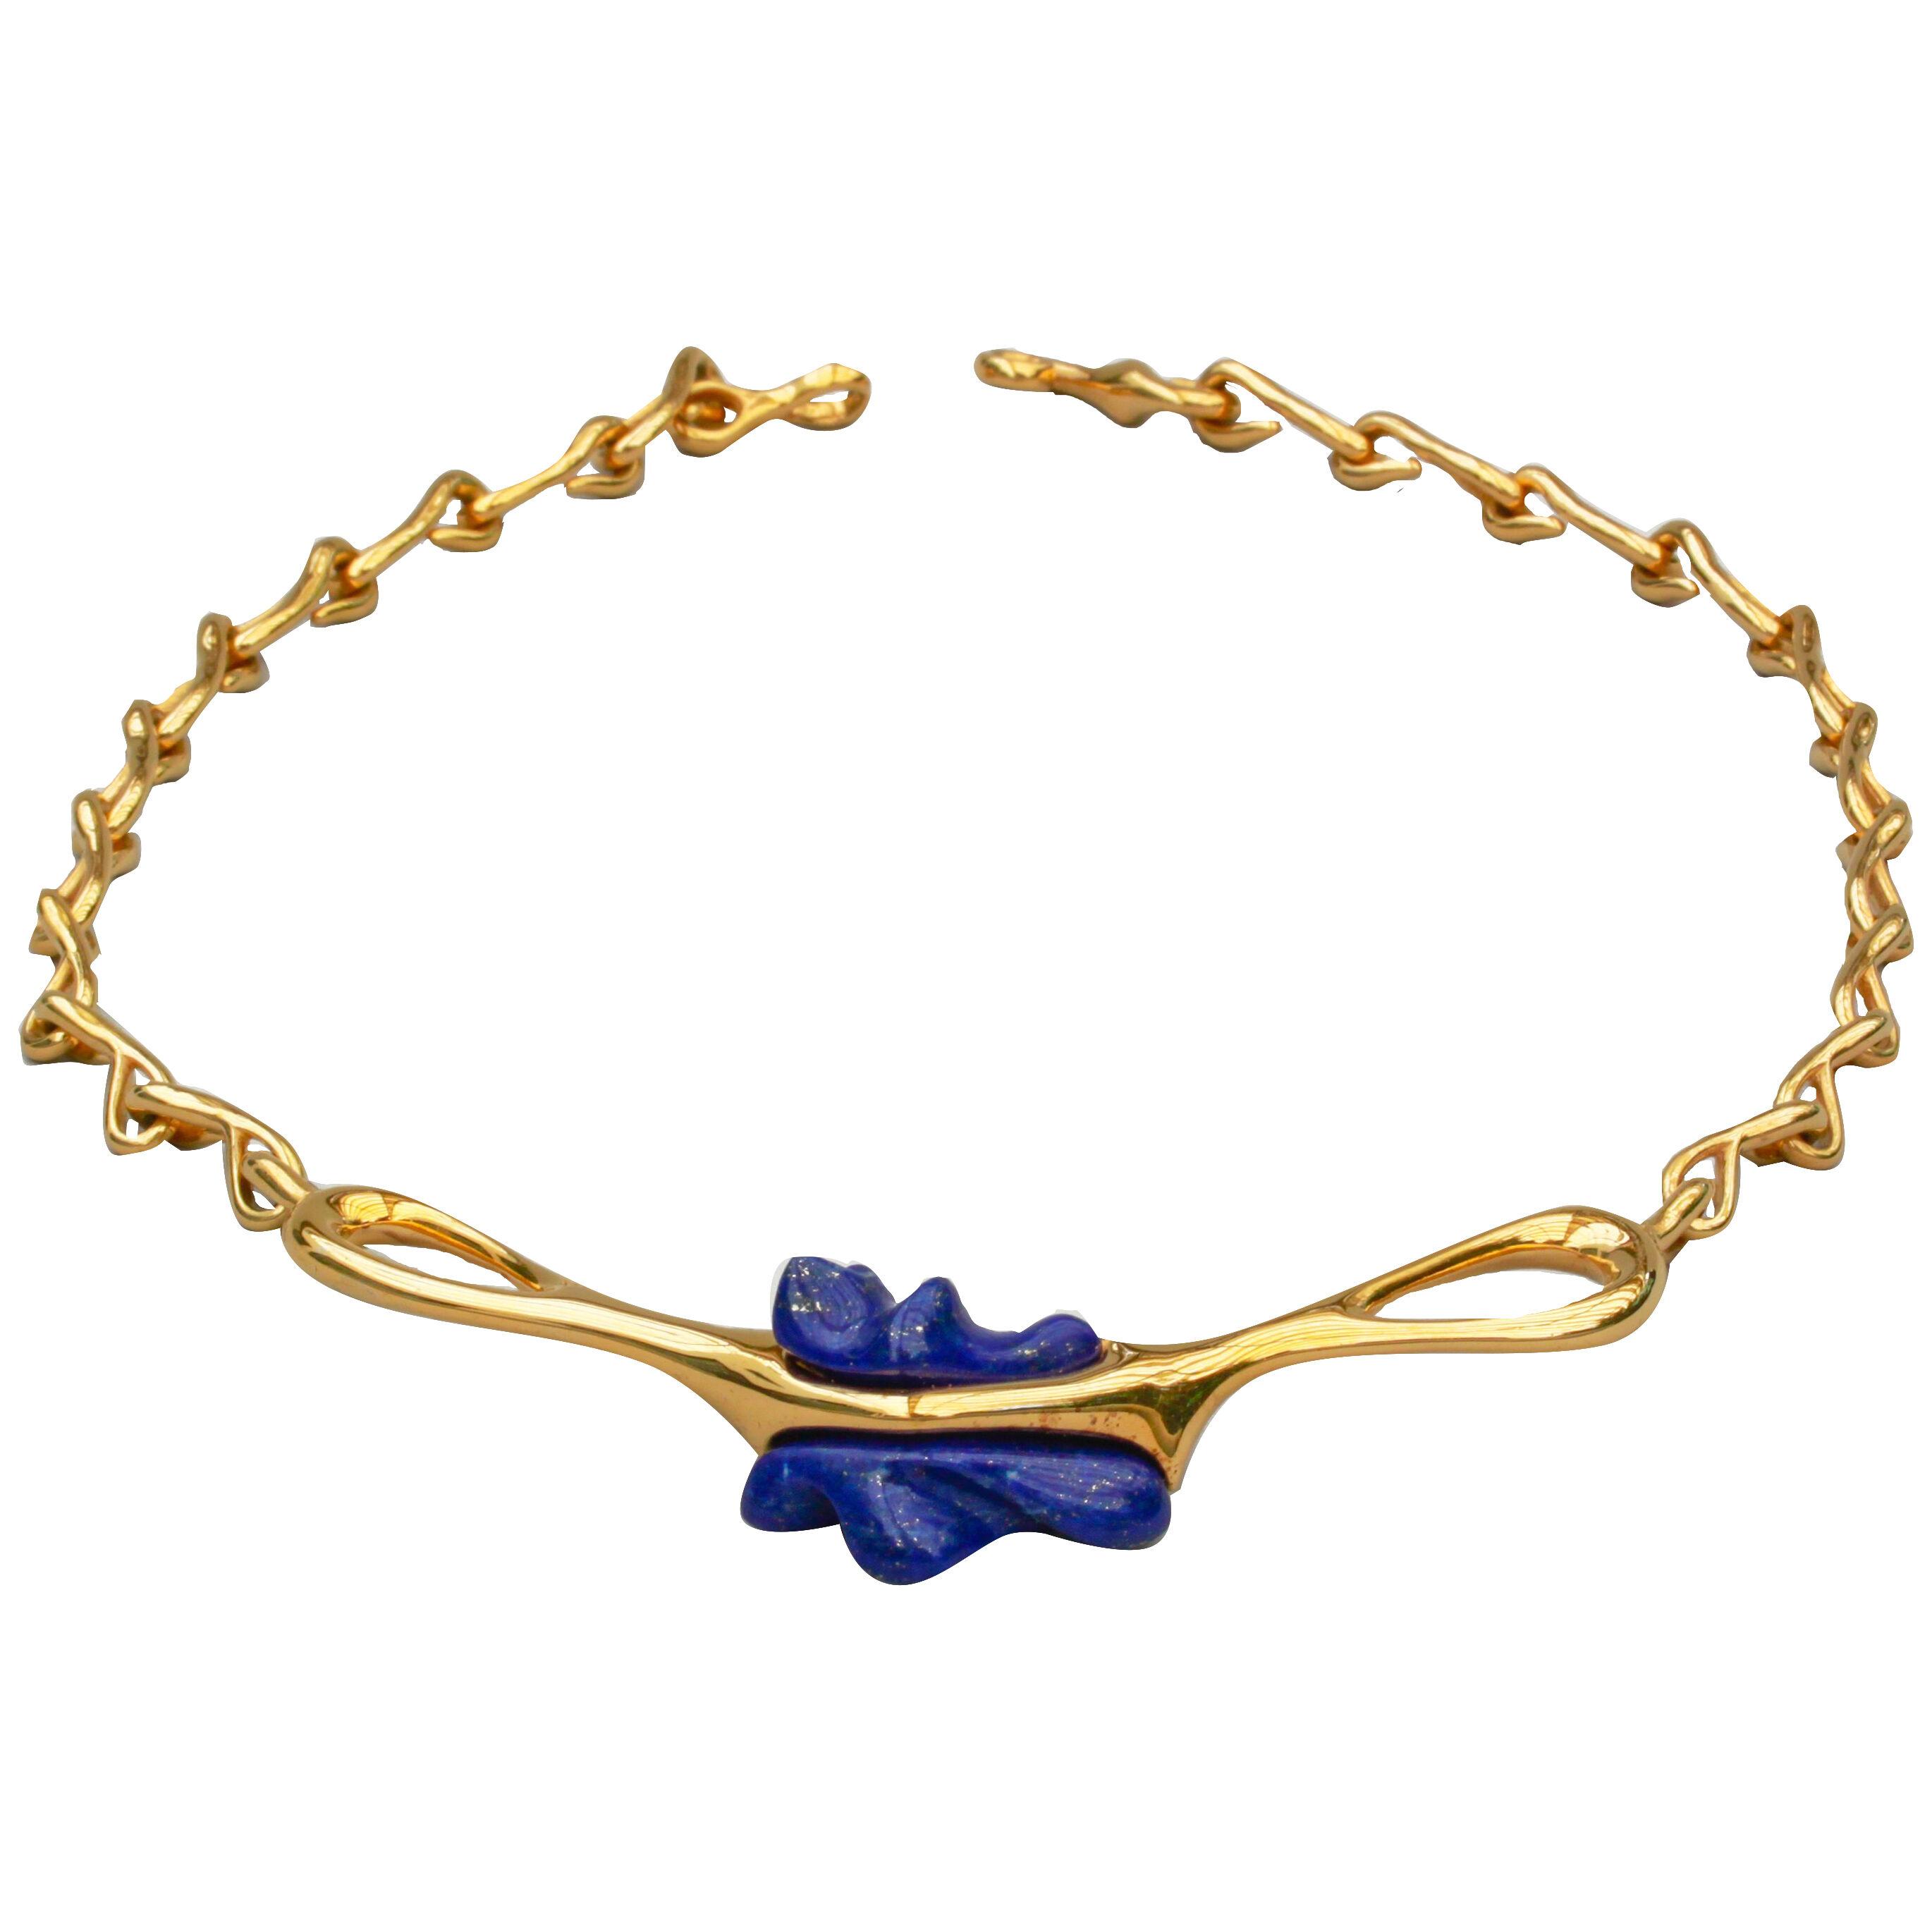 DULCE, Egypt jewellery collection sculptural necklace